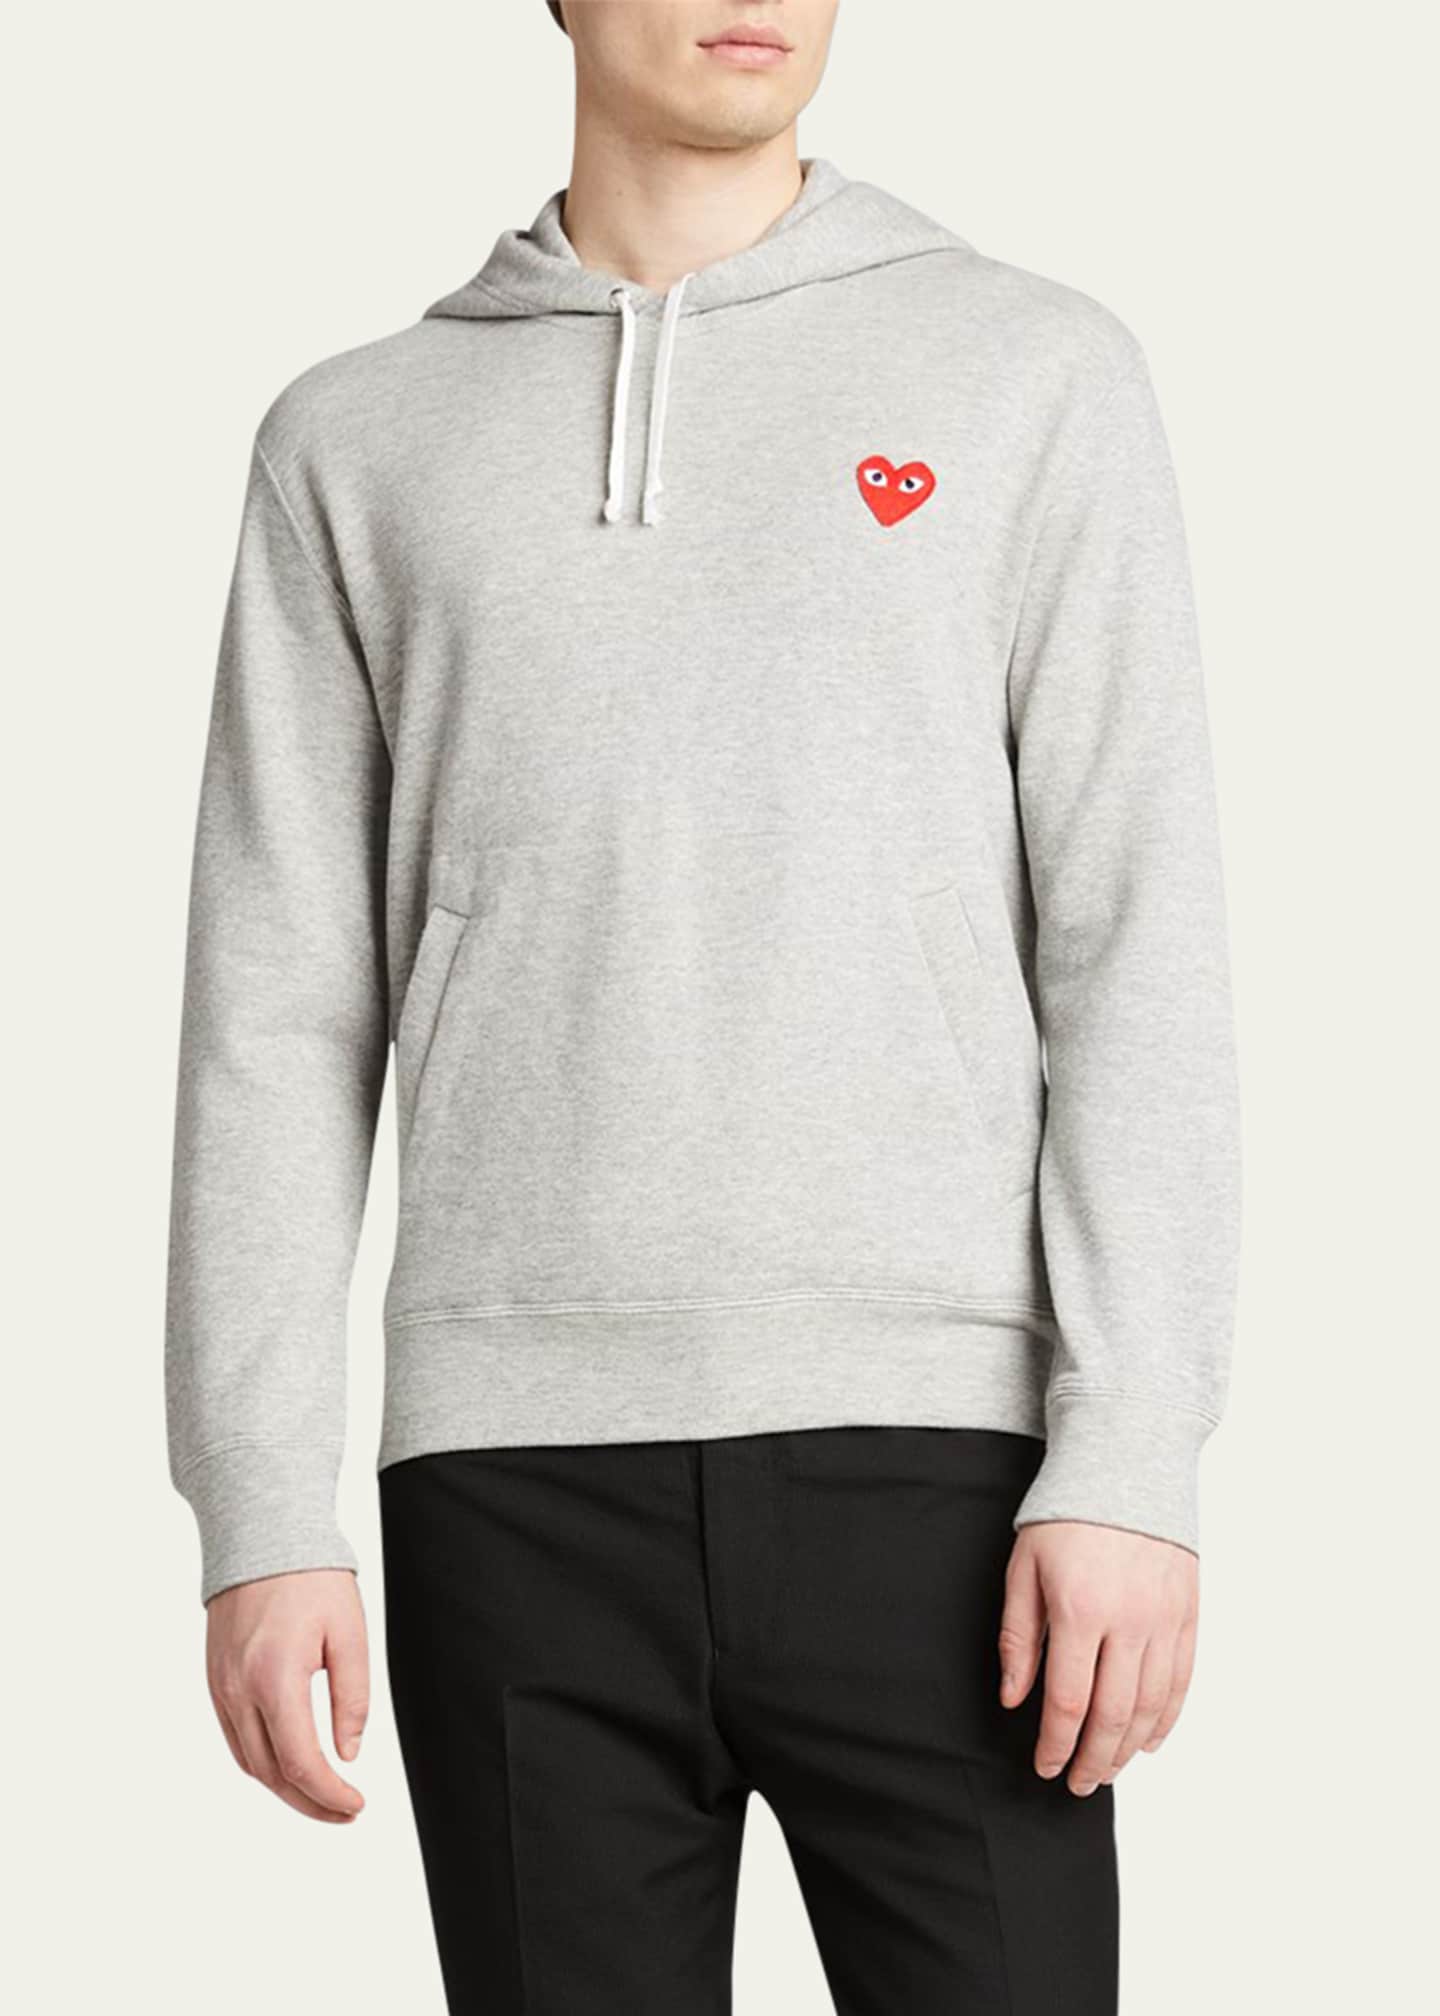 Comme des Garcons Men's Small Heart Pullover Hoodie Image 4 of 5